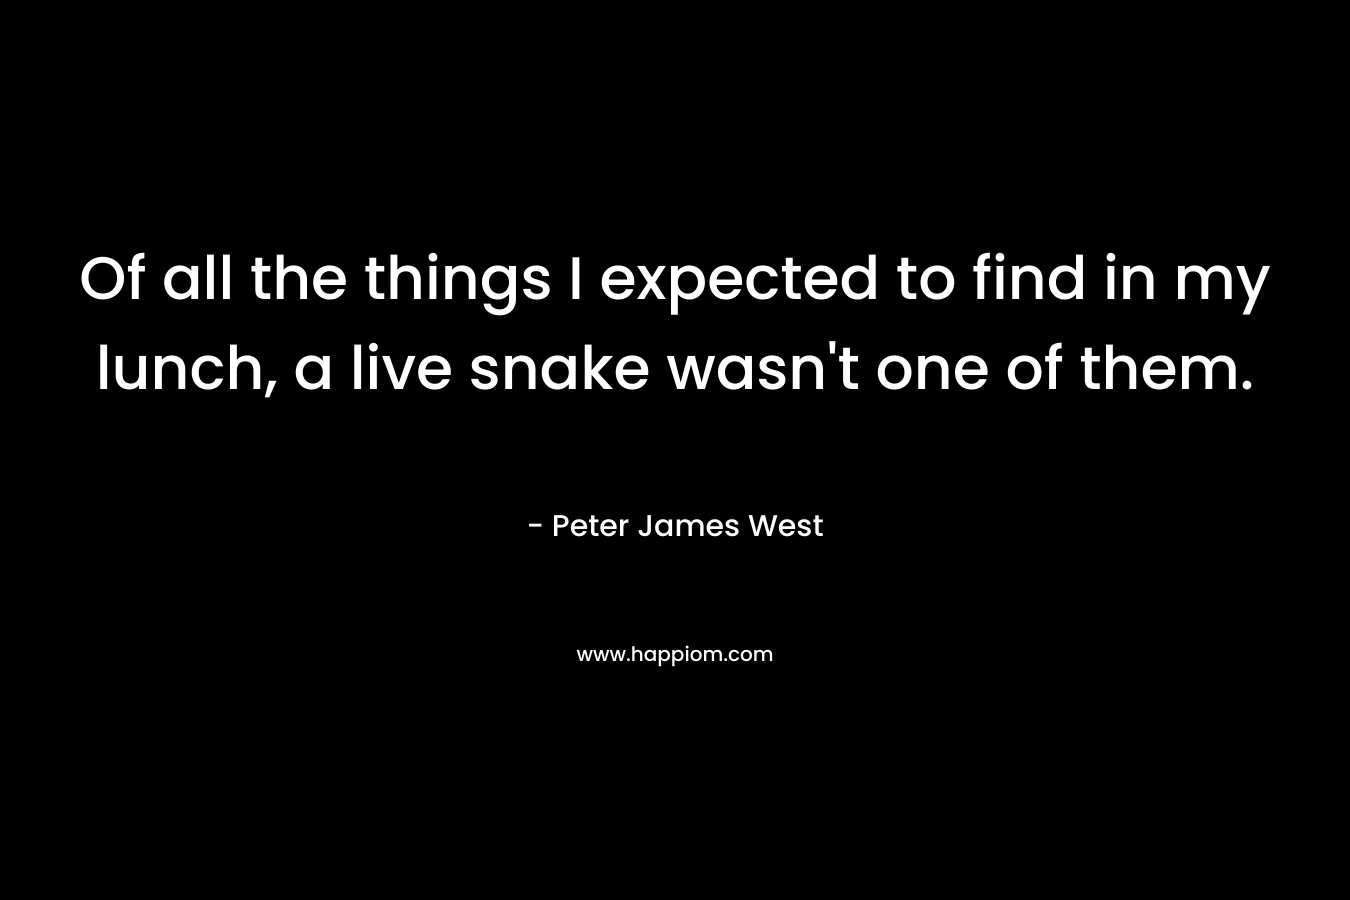 Of all the things I expected to find in my lunch, a live snake wasn’t one of them. – Peter James West